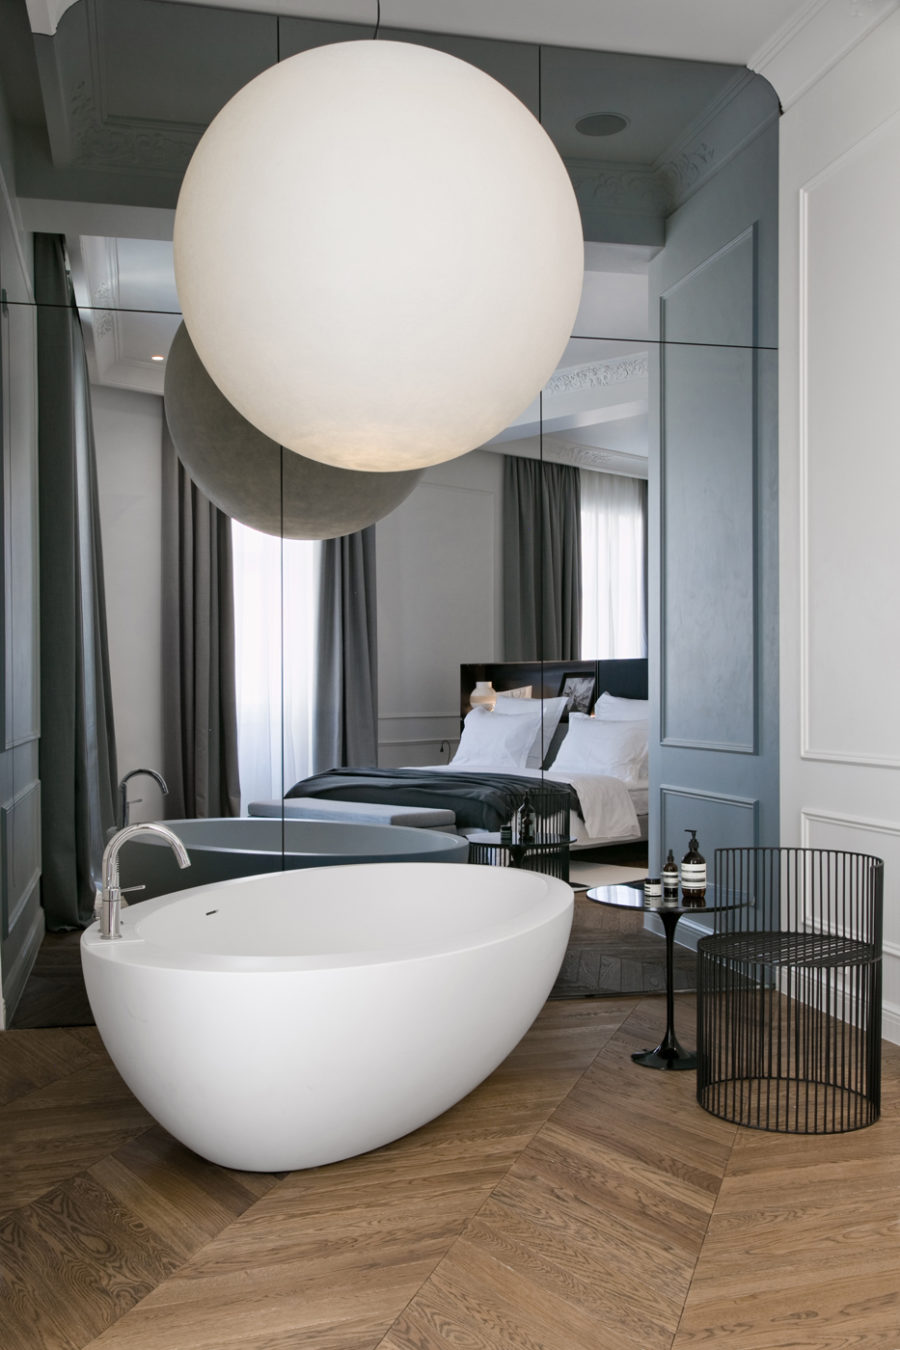 Modern mirror wall, a free standing bathtub and an oversized sphere lamp